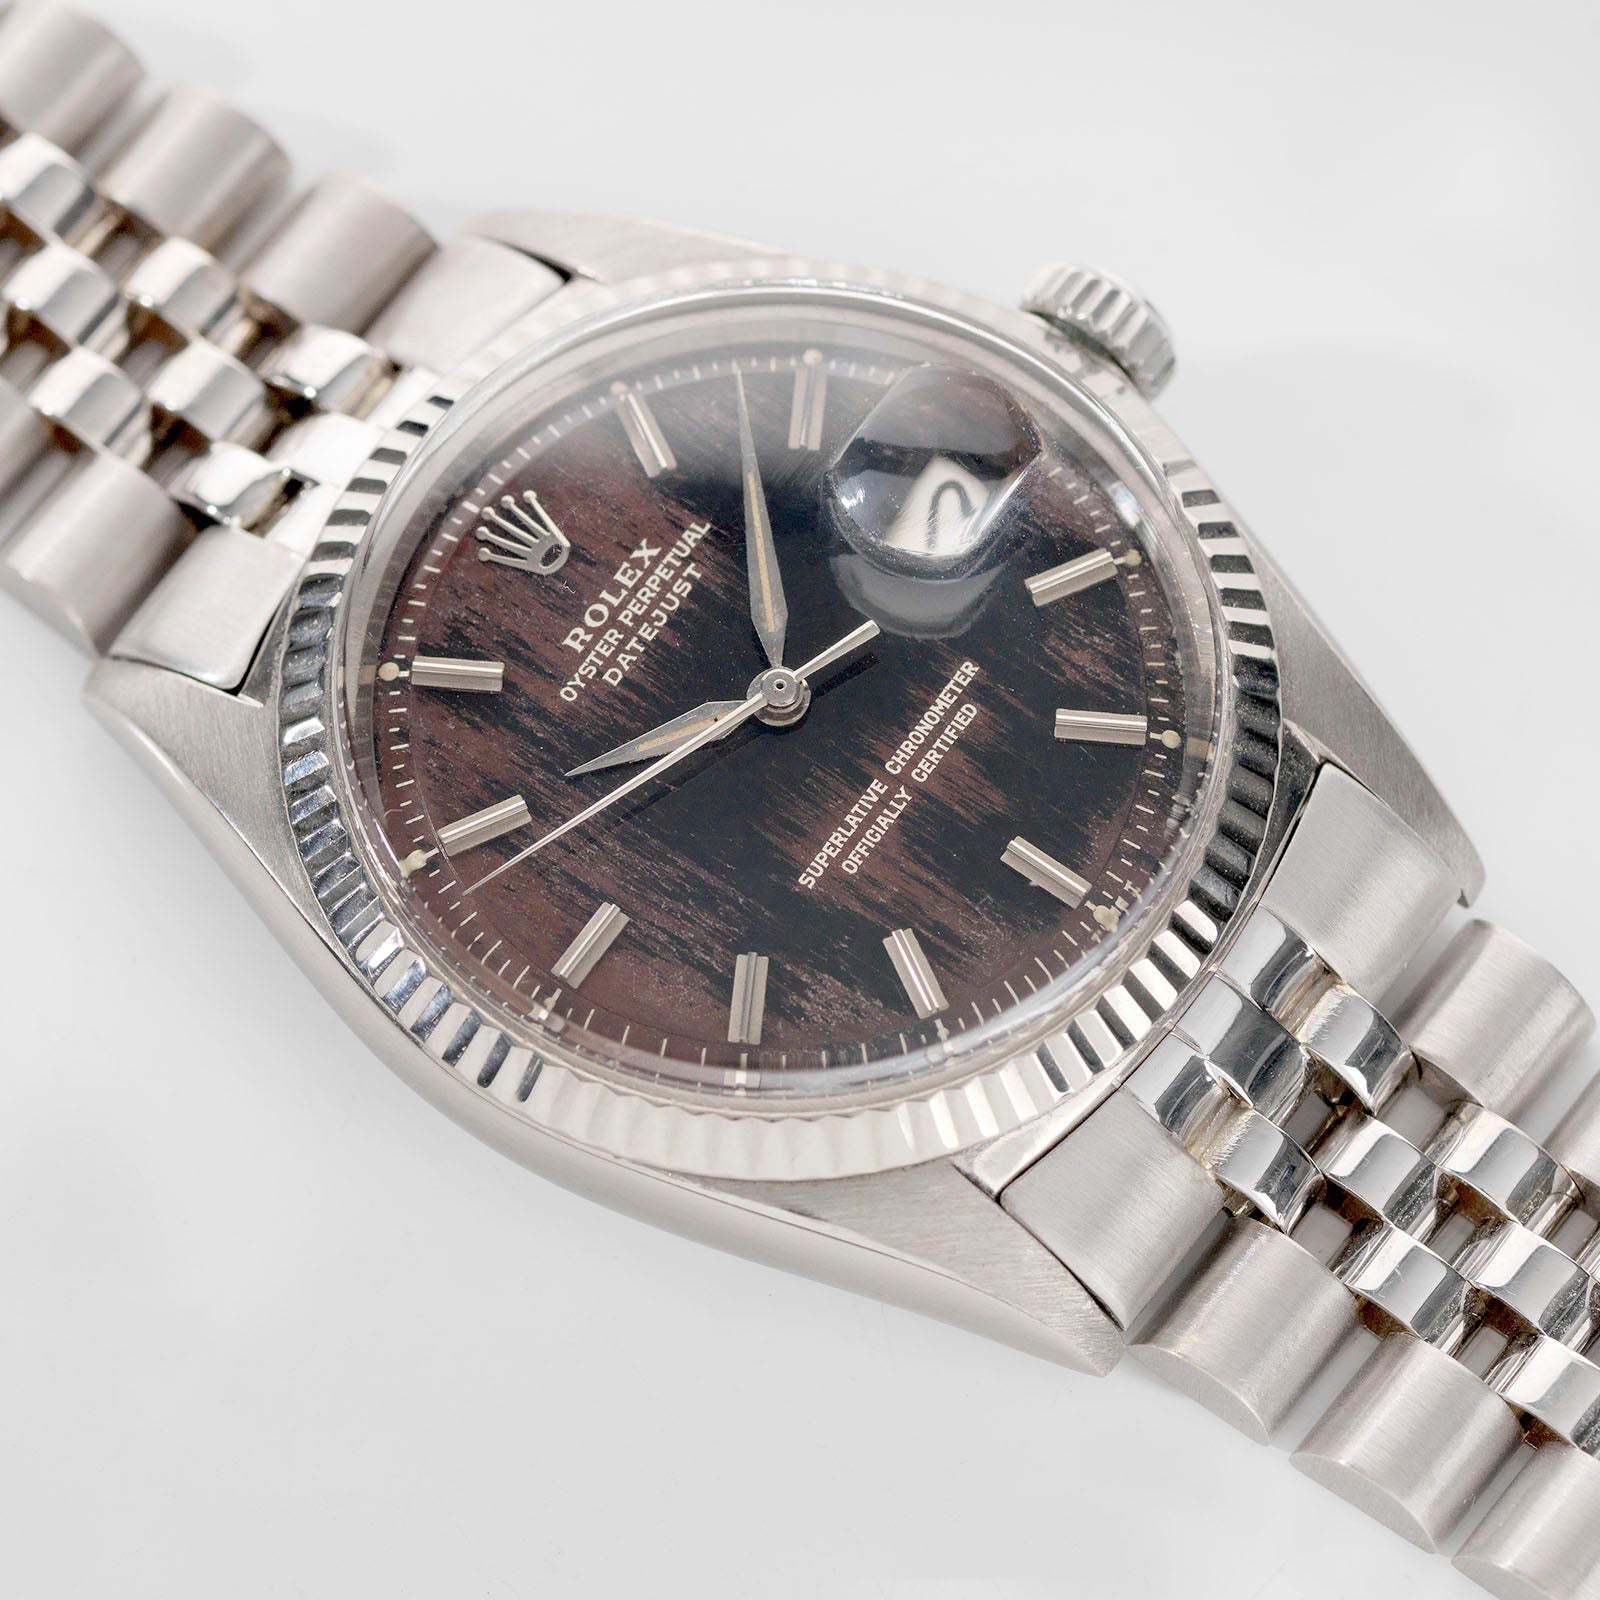 ROLEX WHITE GOLD DATEJUST TROPICAL DIAL REFERENCE 1601